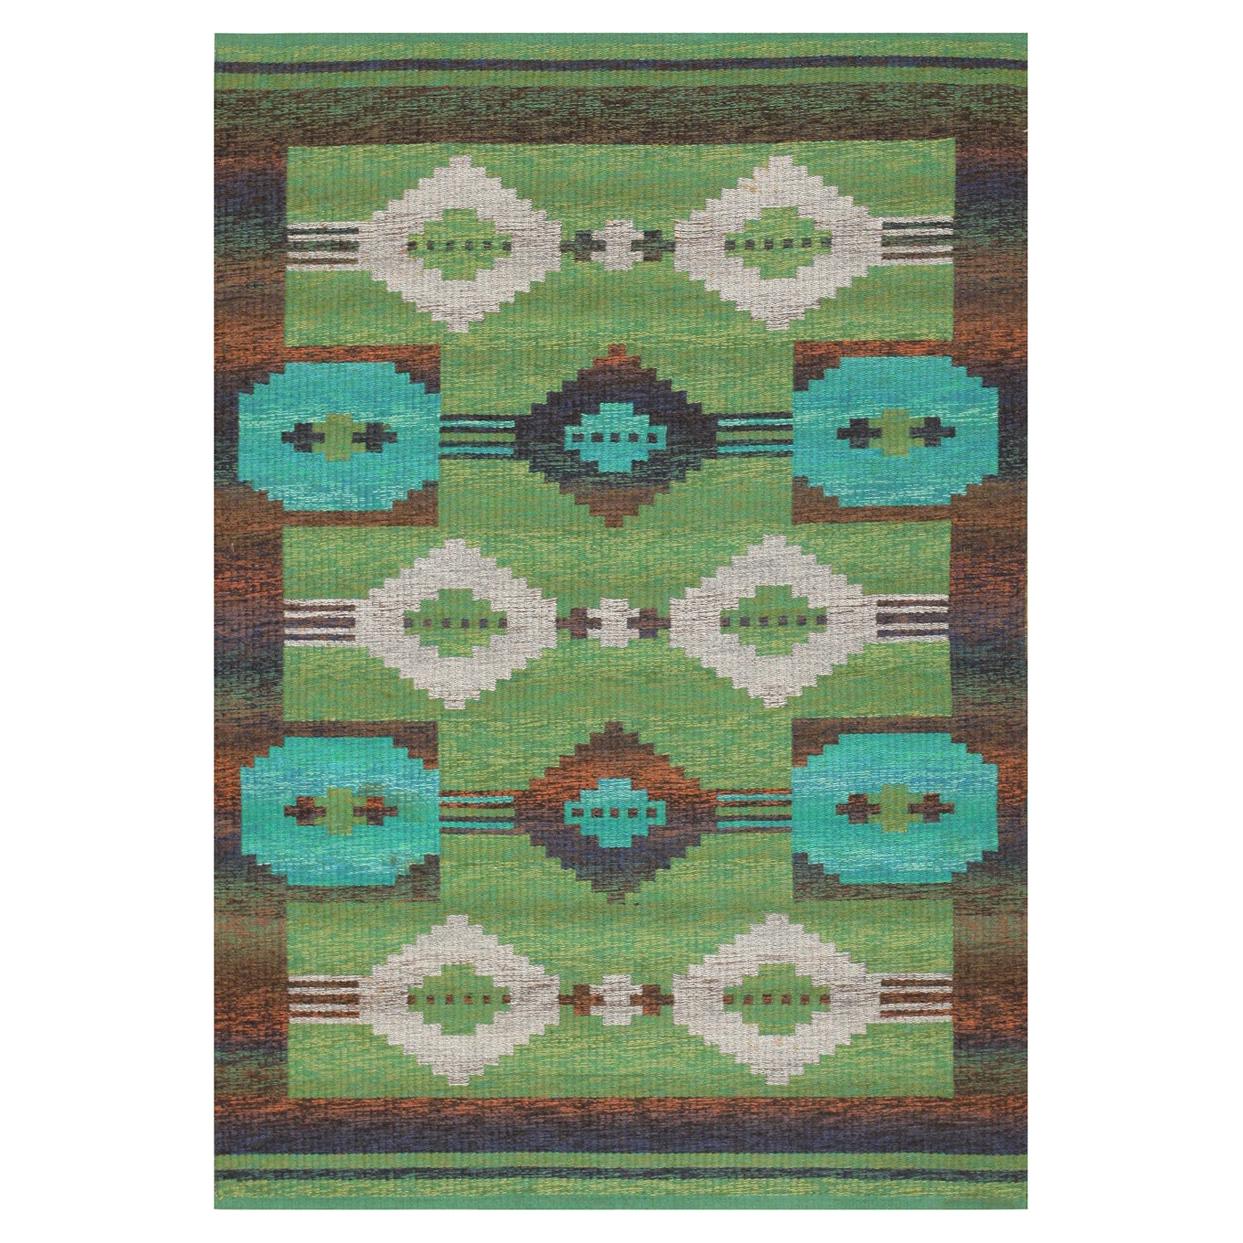 Double Sided Vintage Scandinavian Rug. Size: 4 ft 6 in x 6 ft 6 in